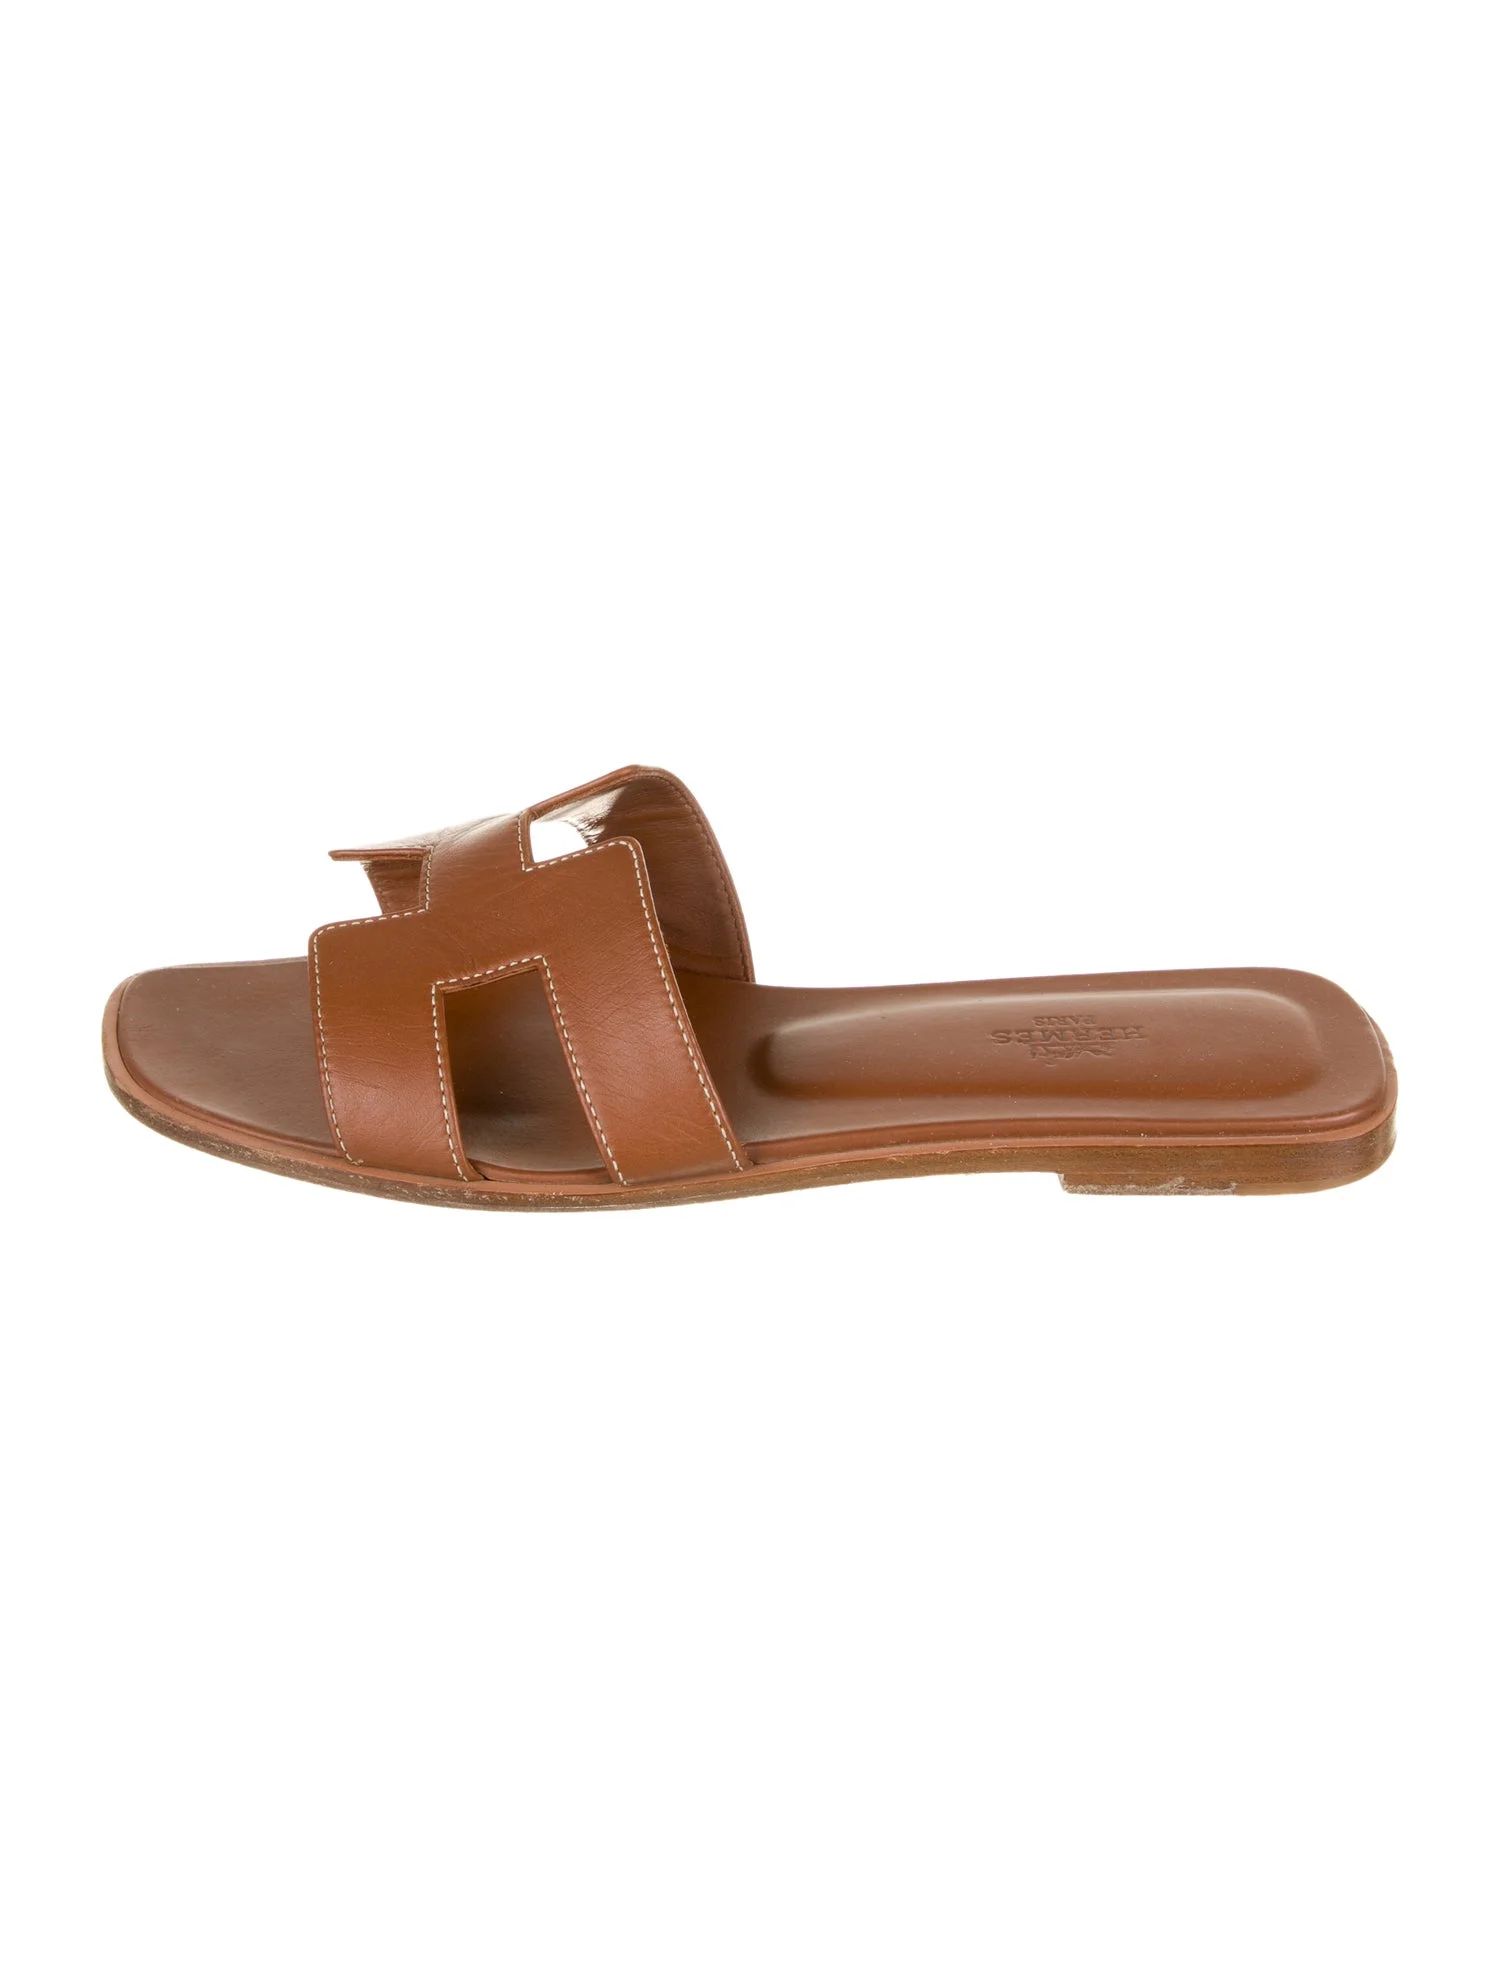 2021 Leather Slides | The RealReal